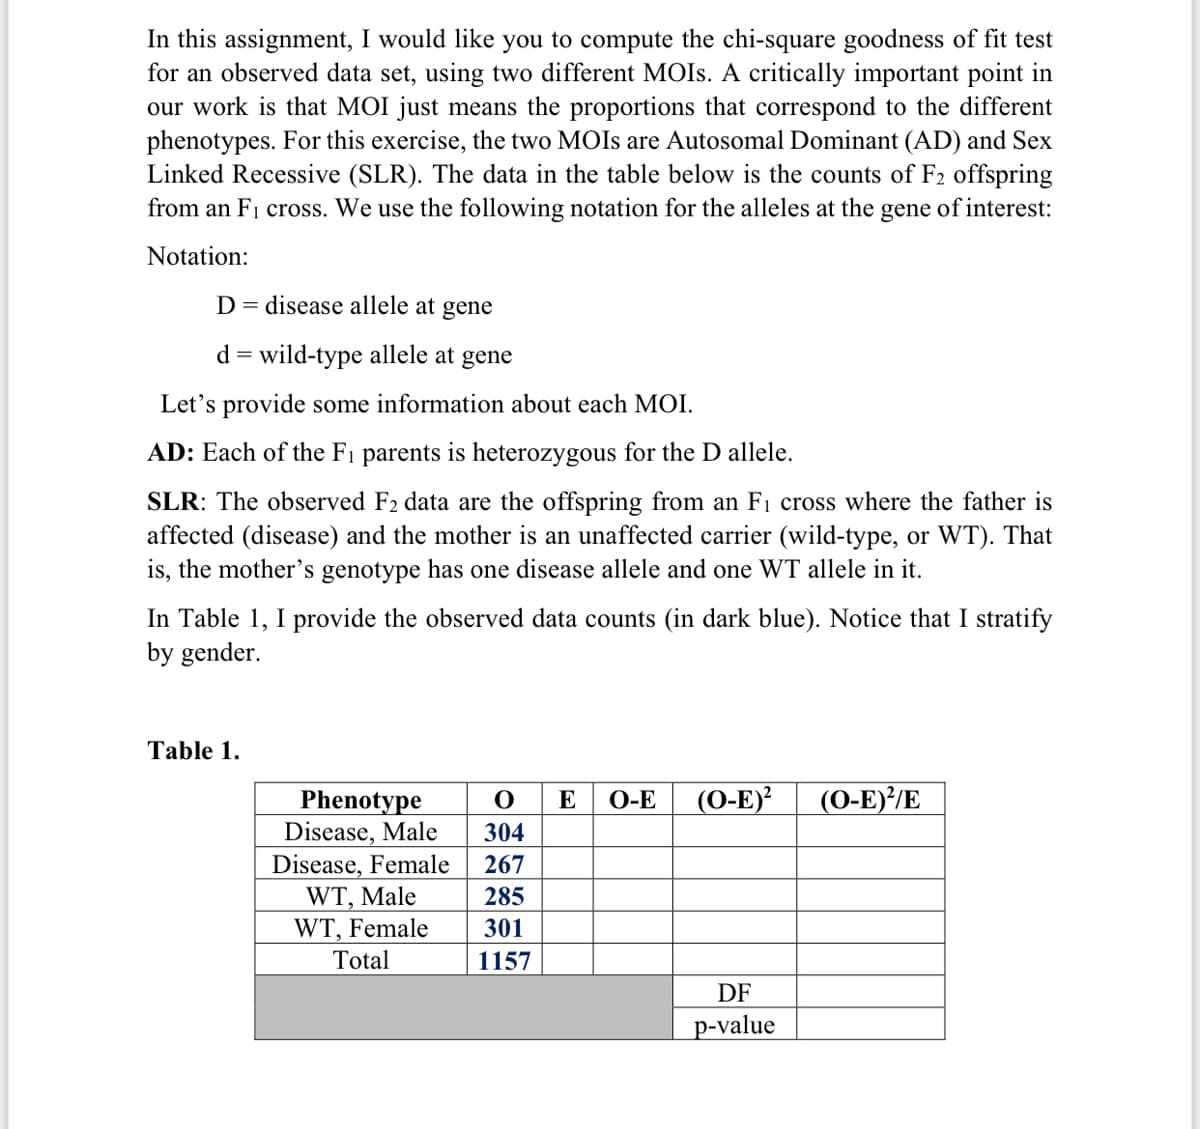 In this assignment, I would like you to compute the chi-square goodness of fit test
for an observed data set, using two different MOIS. A critically important point in
our work is that MOI just means the proportions that correspond to the different
phenotypes. For this exercise, the two MOIS are Autosomal Dominant (AD) and Sex
Linked Recessive (SLR). The data in the table below is the counts of F2 offspring
from an F1 cross. We use the following notation for the alleles at the
gene
of interest:
Notation:
D= disease allele at gene
d = wild-type allele at gene
%3D
Let's provide some information about each MOI.
AD: Each of the Fi parents is heterozygous for the D allele.
SLR: The observed F2 data are the offspring from an F1 cross where the father is
affected (disease) and the mother is an unaffected carrier (wild-type, or WT). That
is, the mother's genotype has one disease allele and one WT allele in it.
In Table 1, I provide the observed data counts (in dark blue). Notice that I stratify
by gender.
Table 1.
(0-E)²
(0-E)?/E
Phenotype
Disease, Male
Disease, Female
WT, Male
WT, Female
Total
E
O-E
304
267
285
301
1157
DF
p-value
